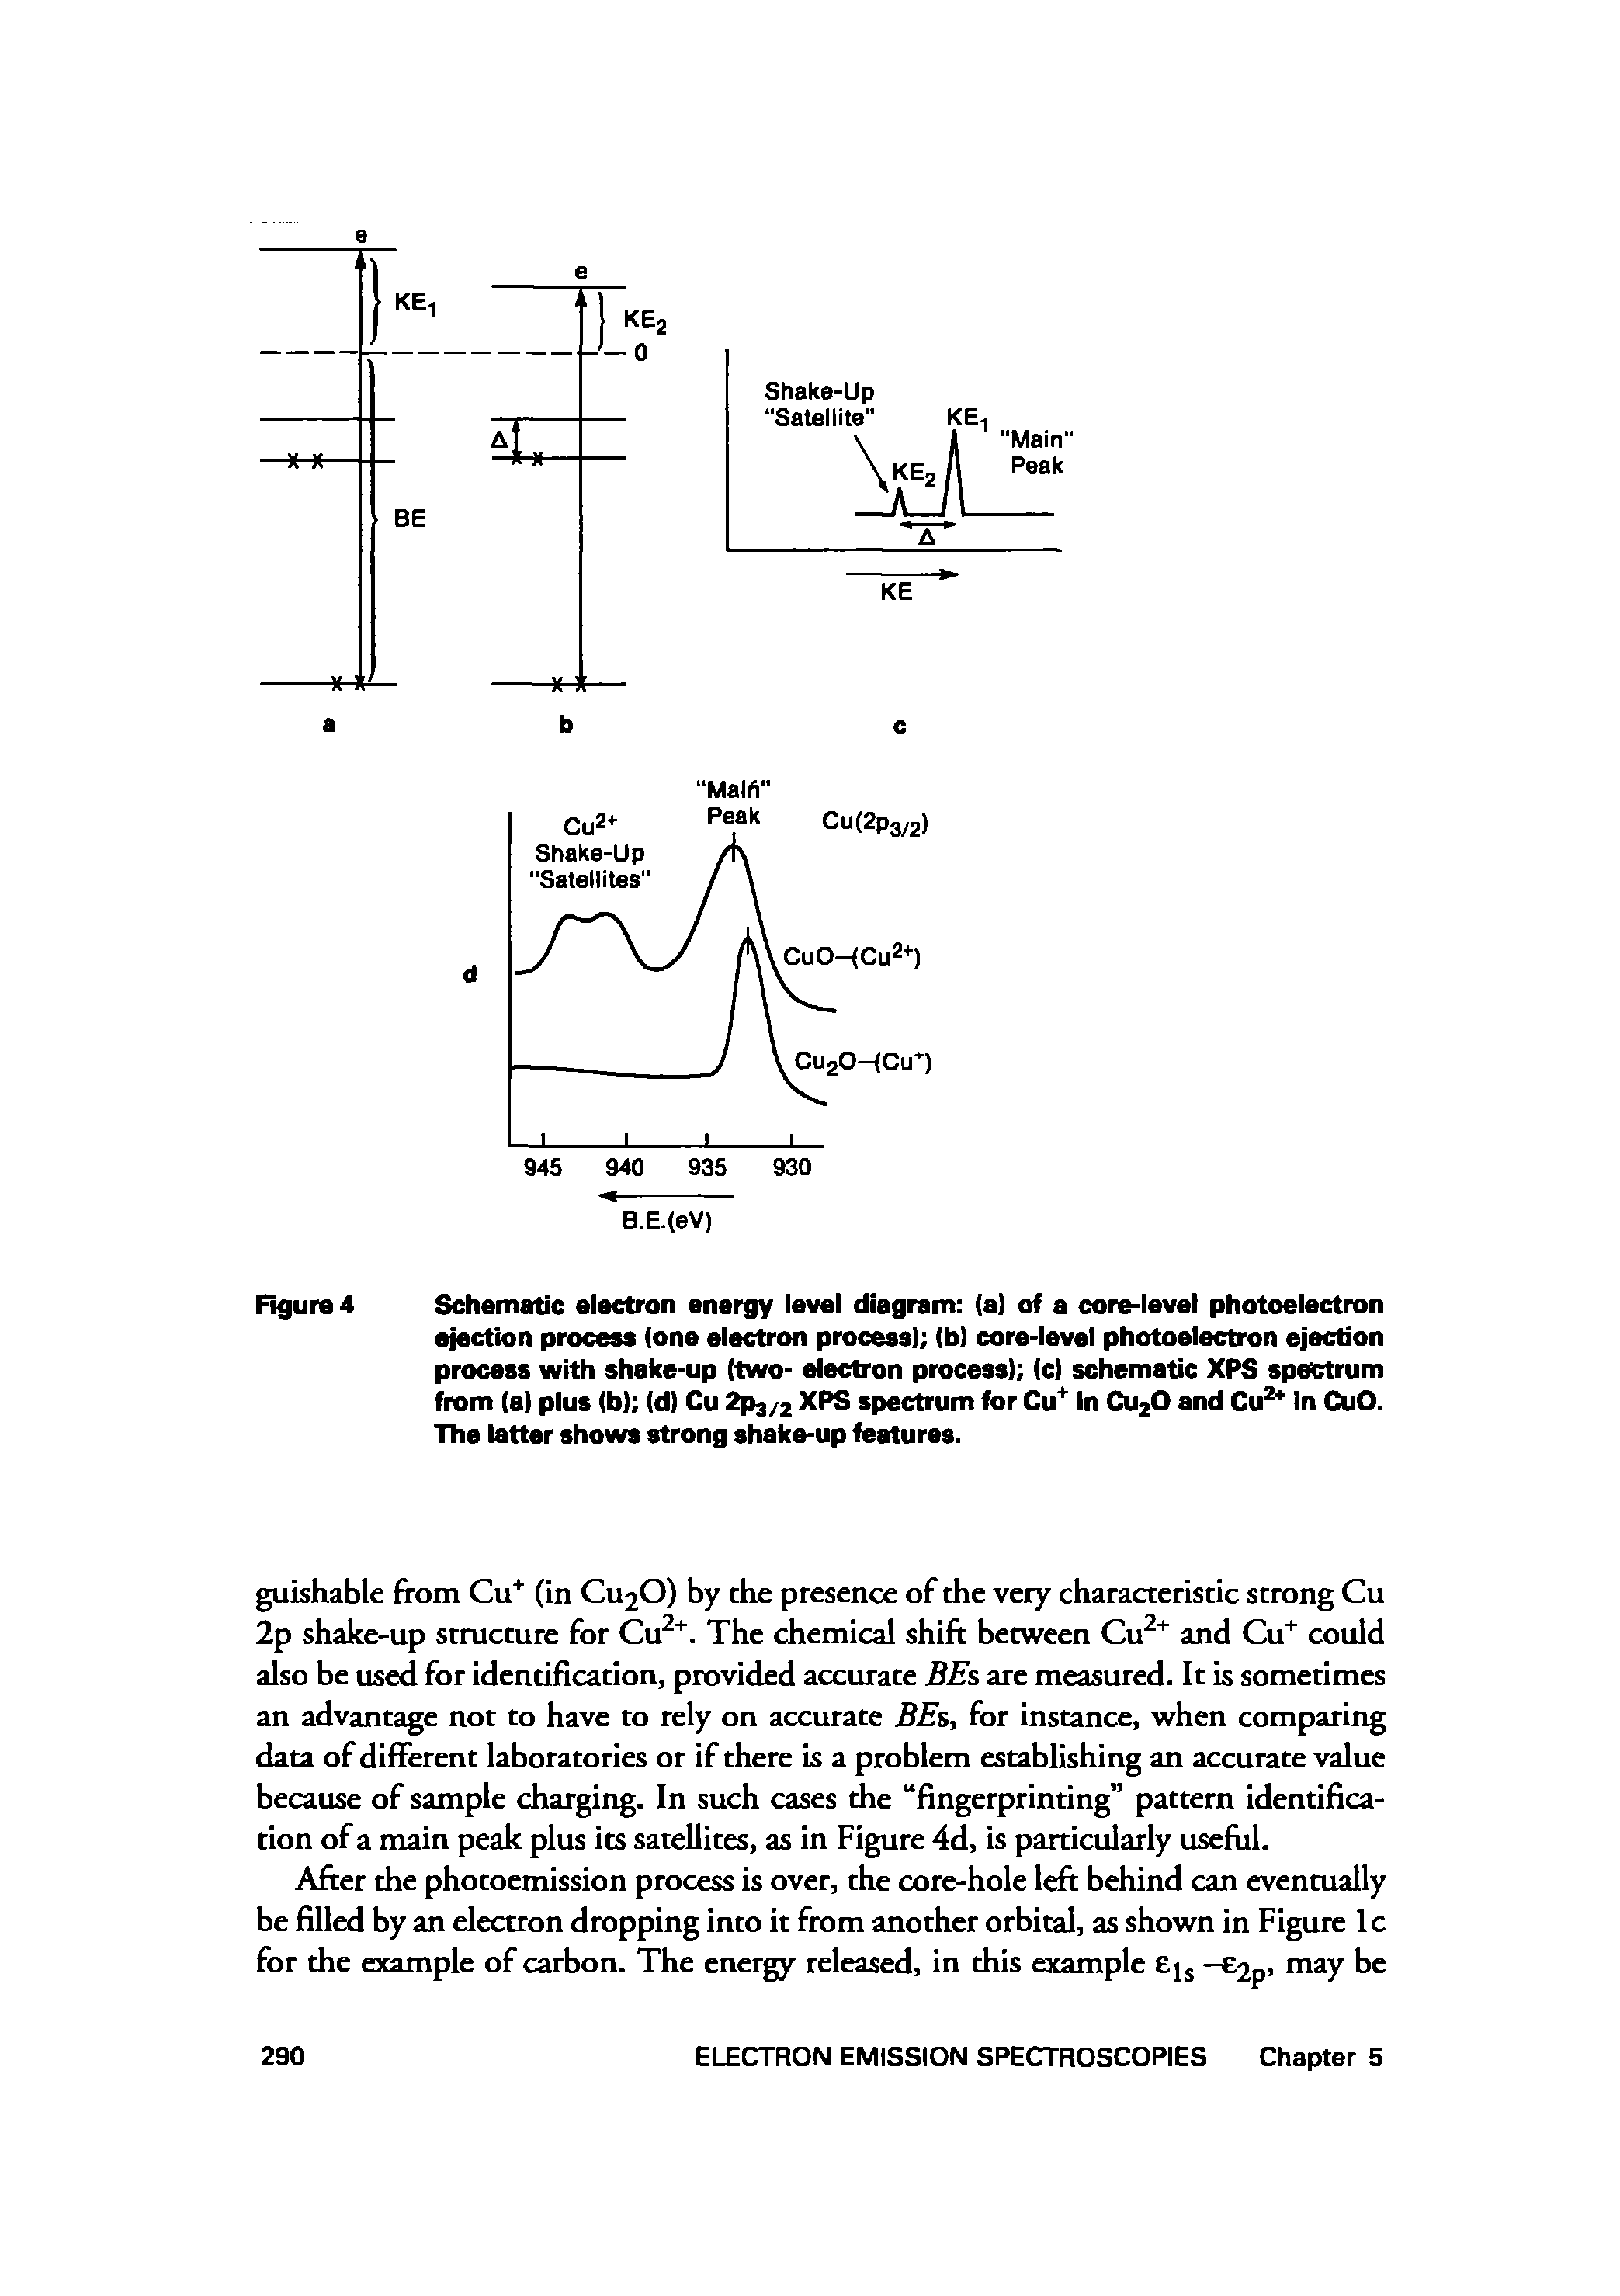 Figure 4 Schematic electron energy level diagram (a) of a core-level photoelectron ejection process (one electron process) (b) core-level photoelectron ejection process with shake-up (two- electron process) (c) schematic XPS spectrum from (a) plus (b) (d) Cu 2pa/2 XPS spectrum for Cu in CU2O and Cu in CuO. The latter shows strong shake-up features.